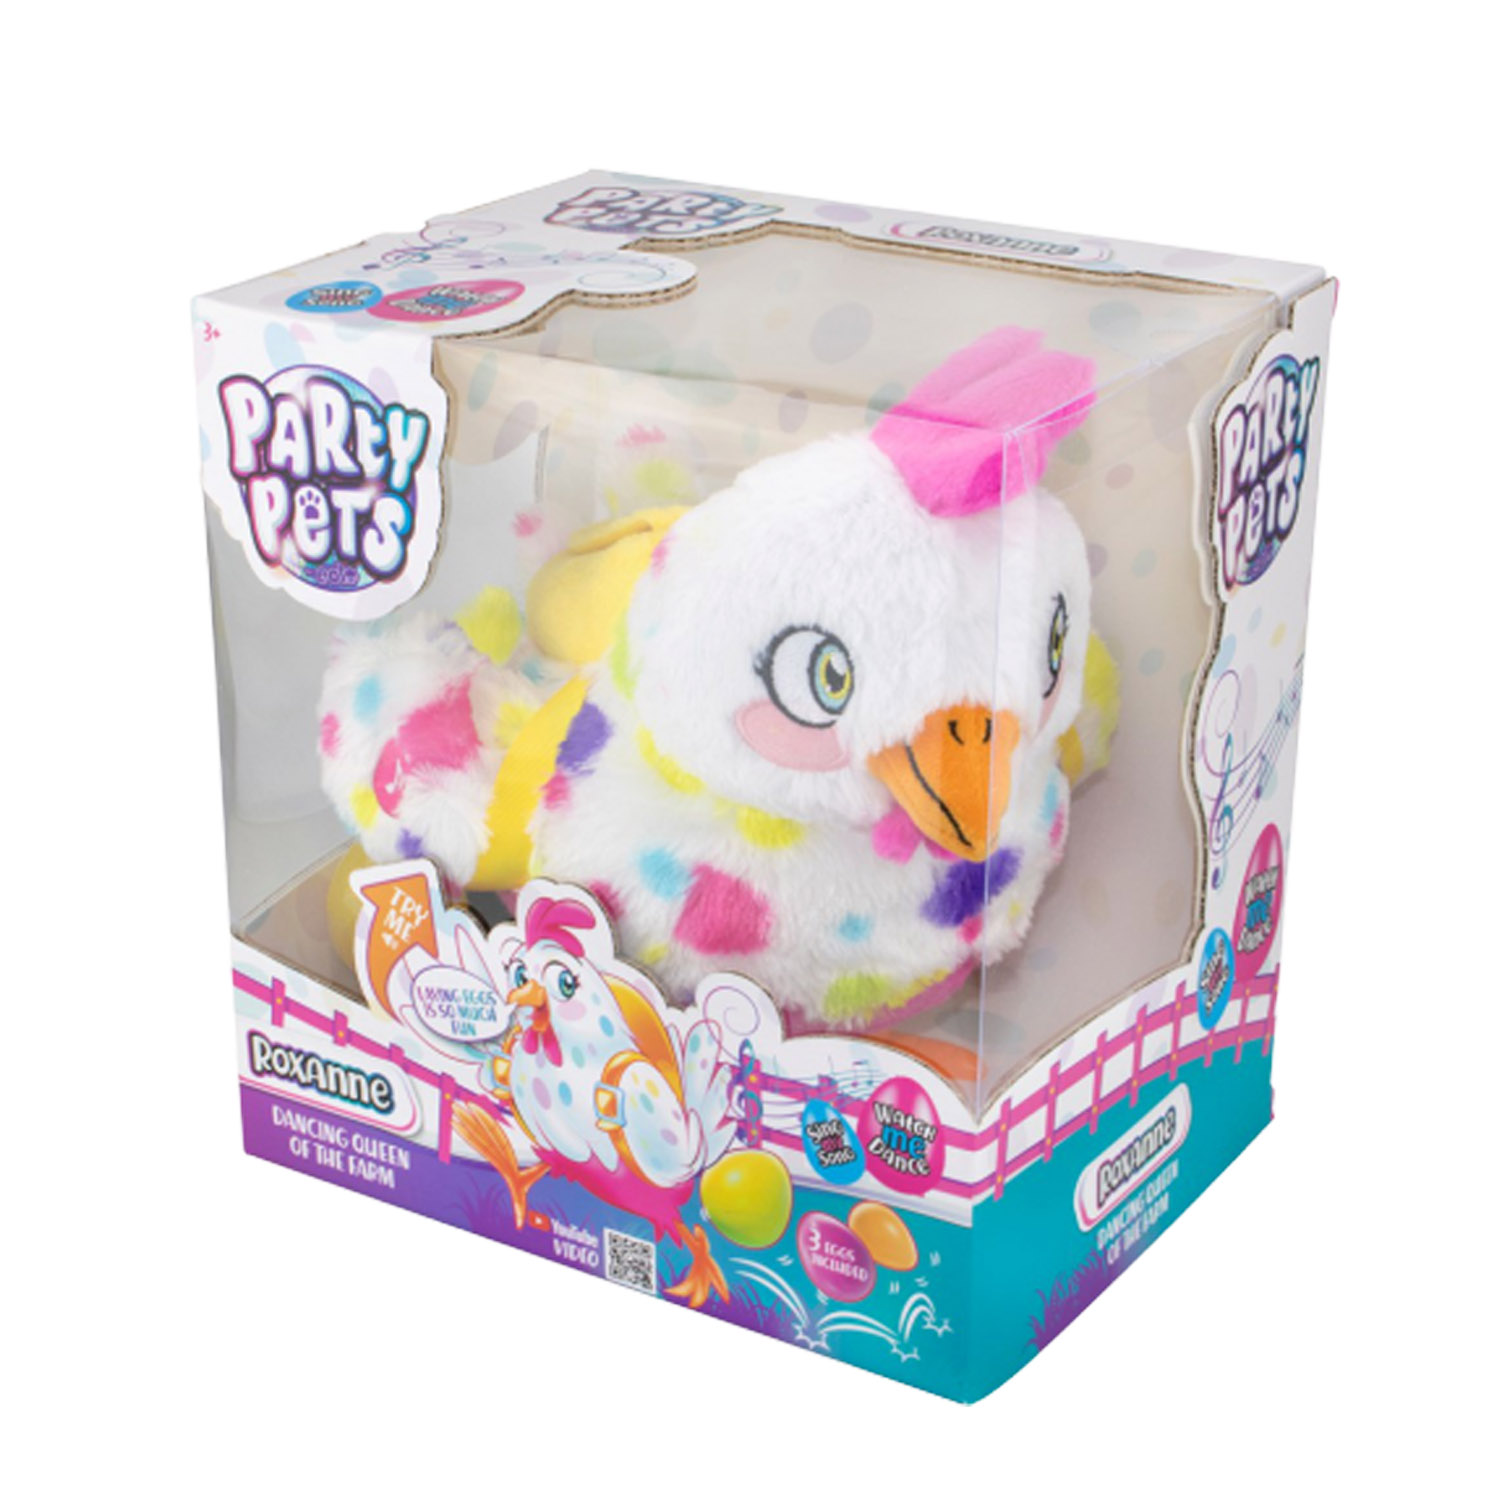 PARTY PETS CHICKEN